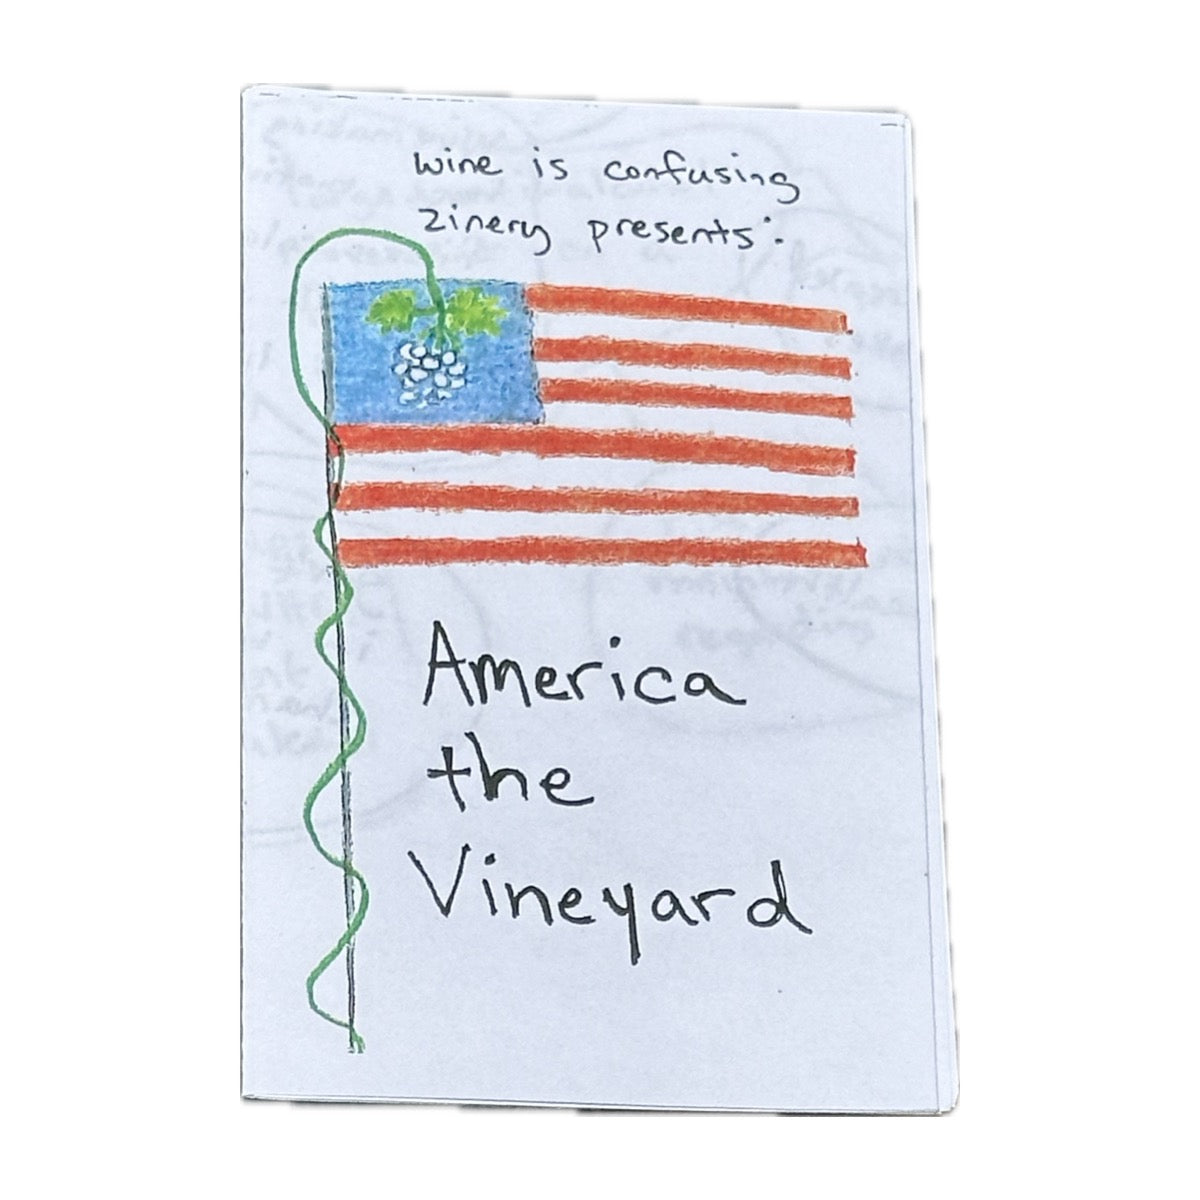 America The Vineyard by Wine Is Confusing